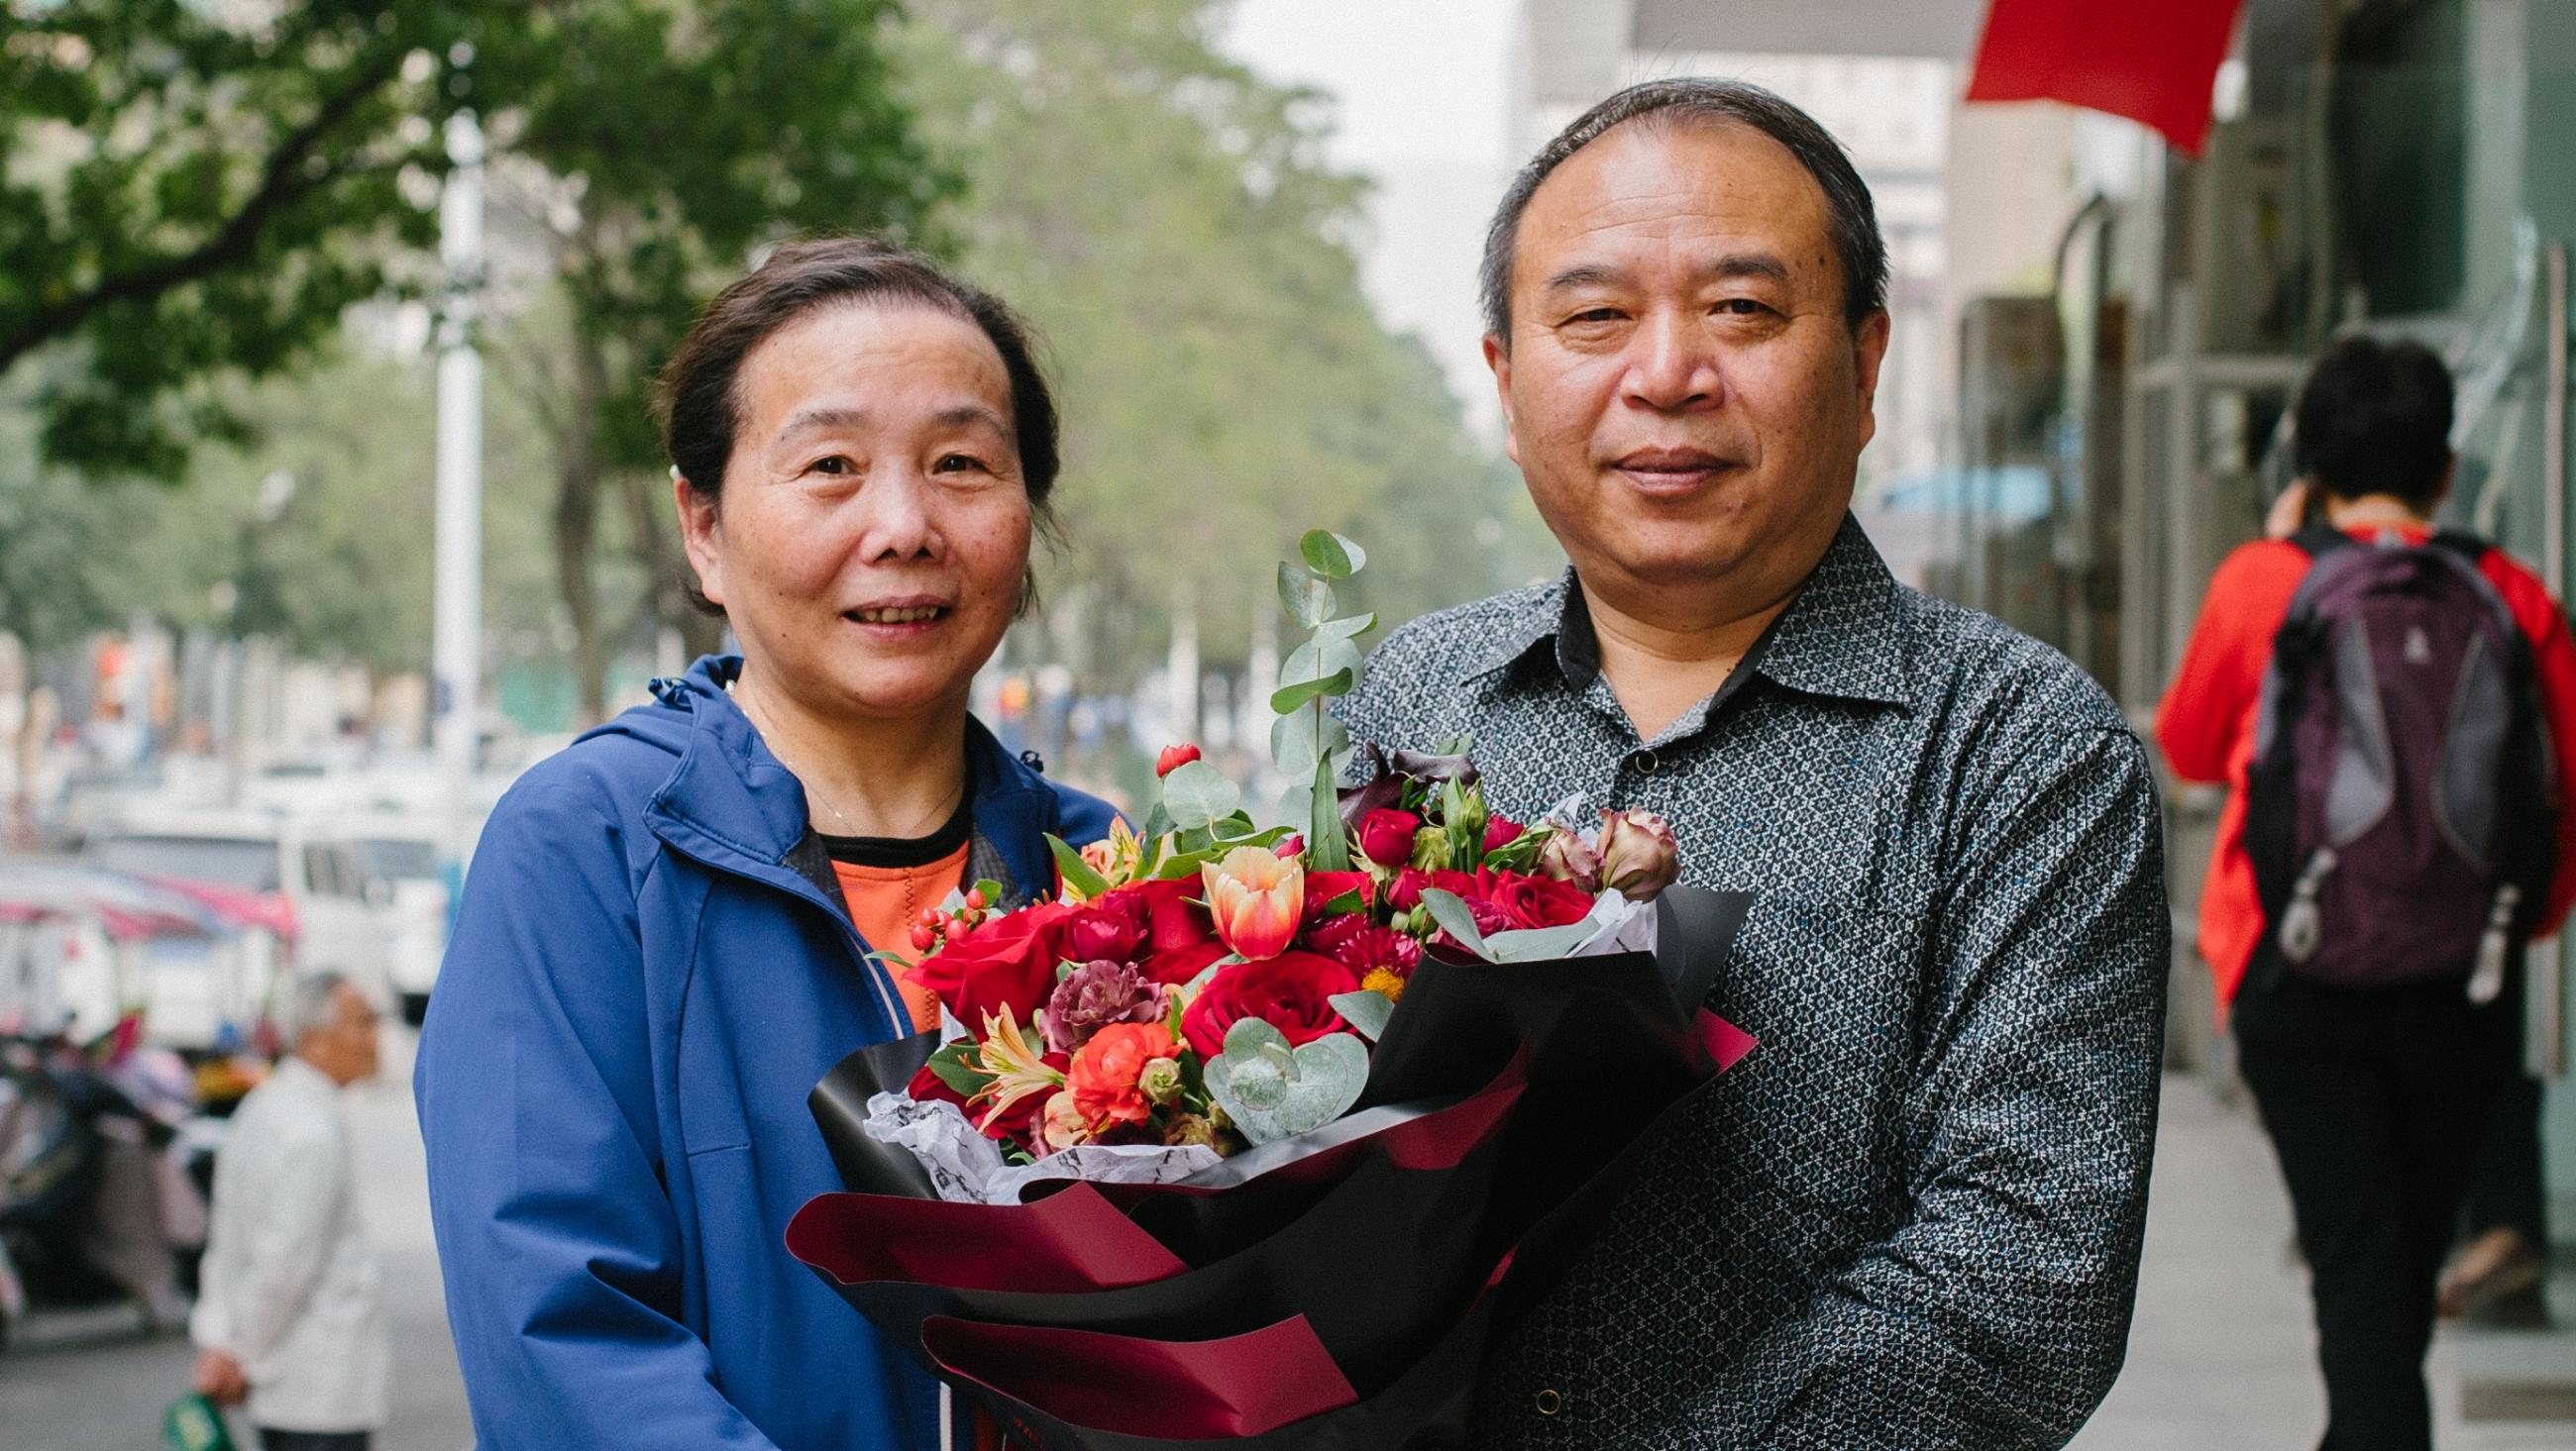 A man and woman stand outside with a bouquet of flowers